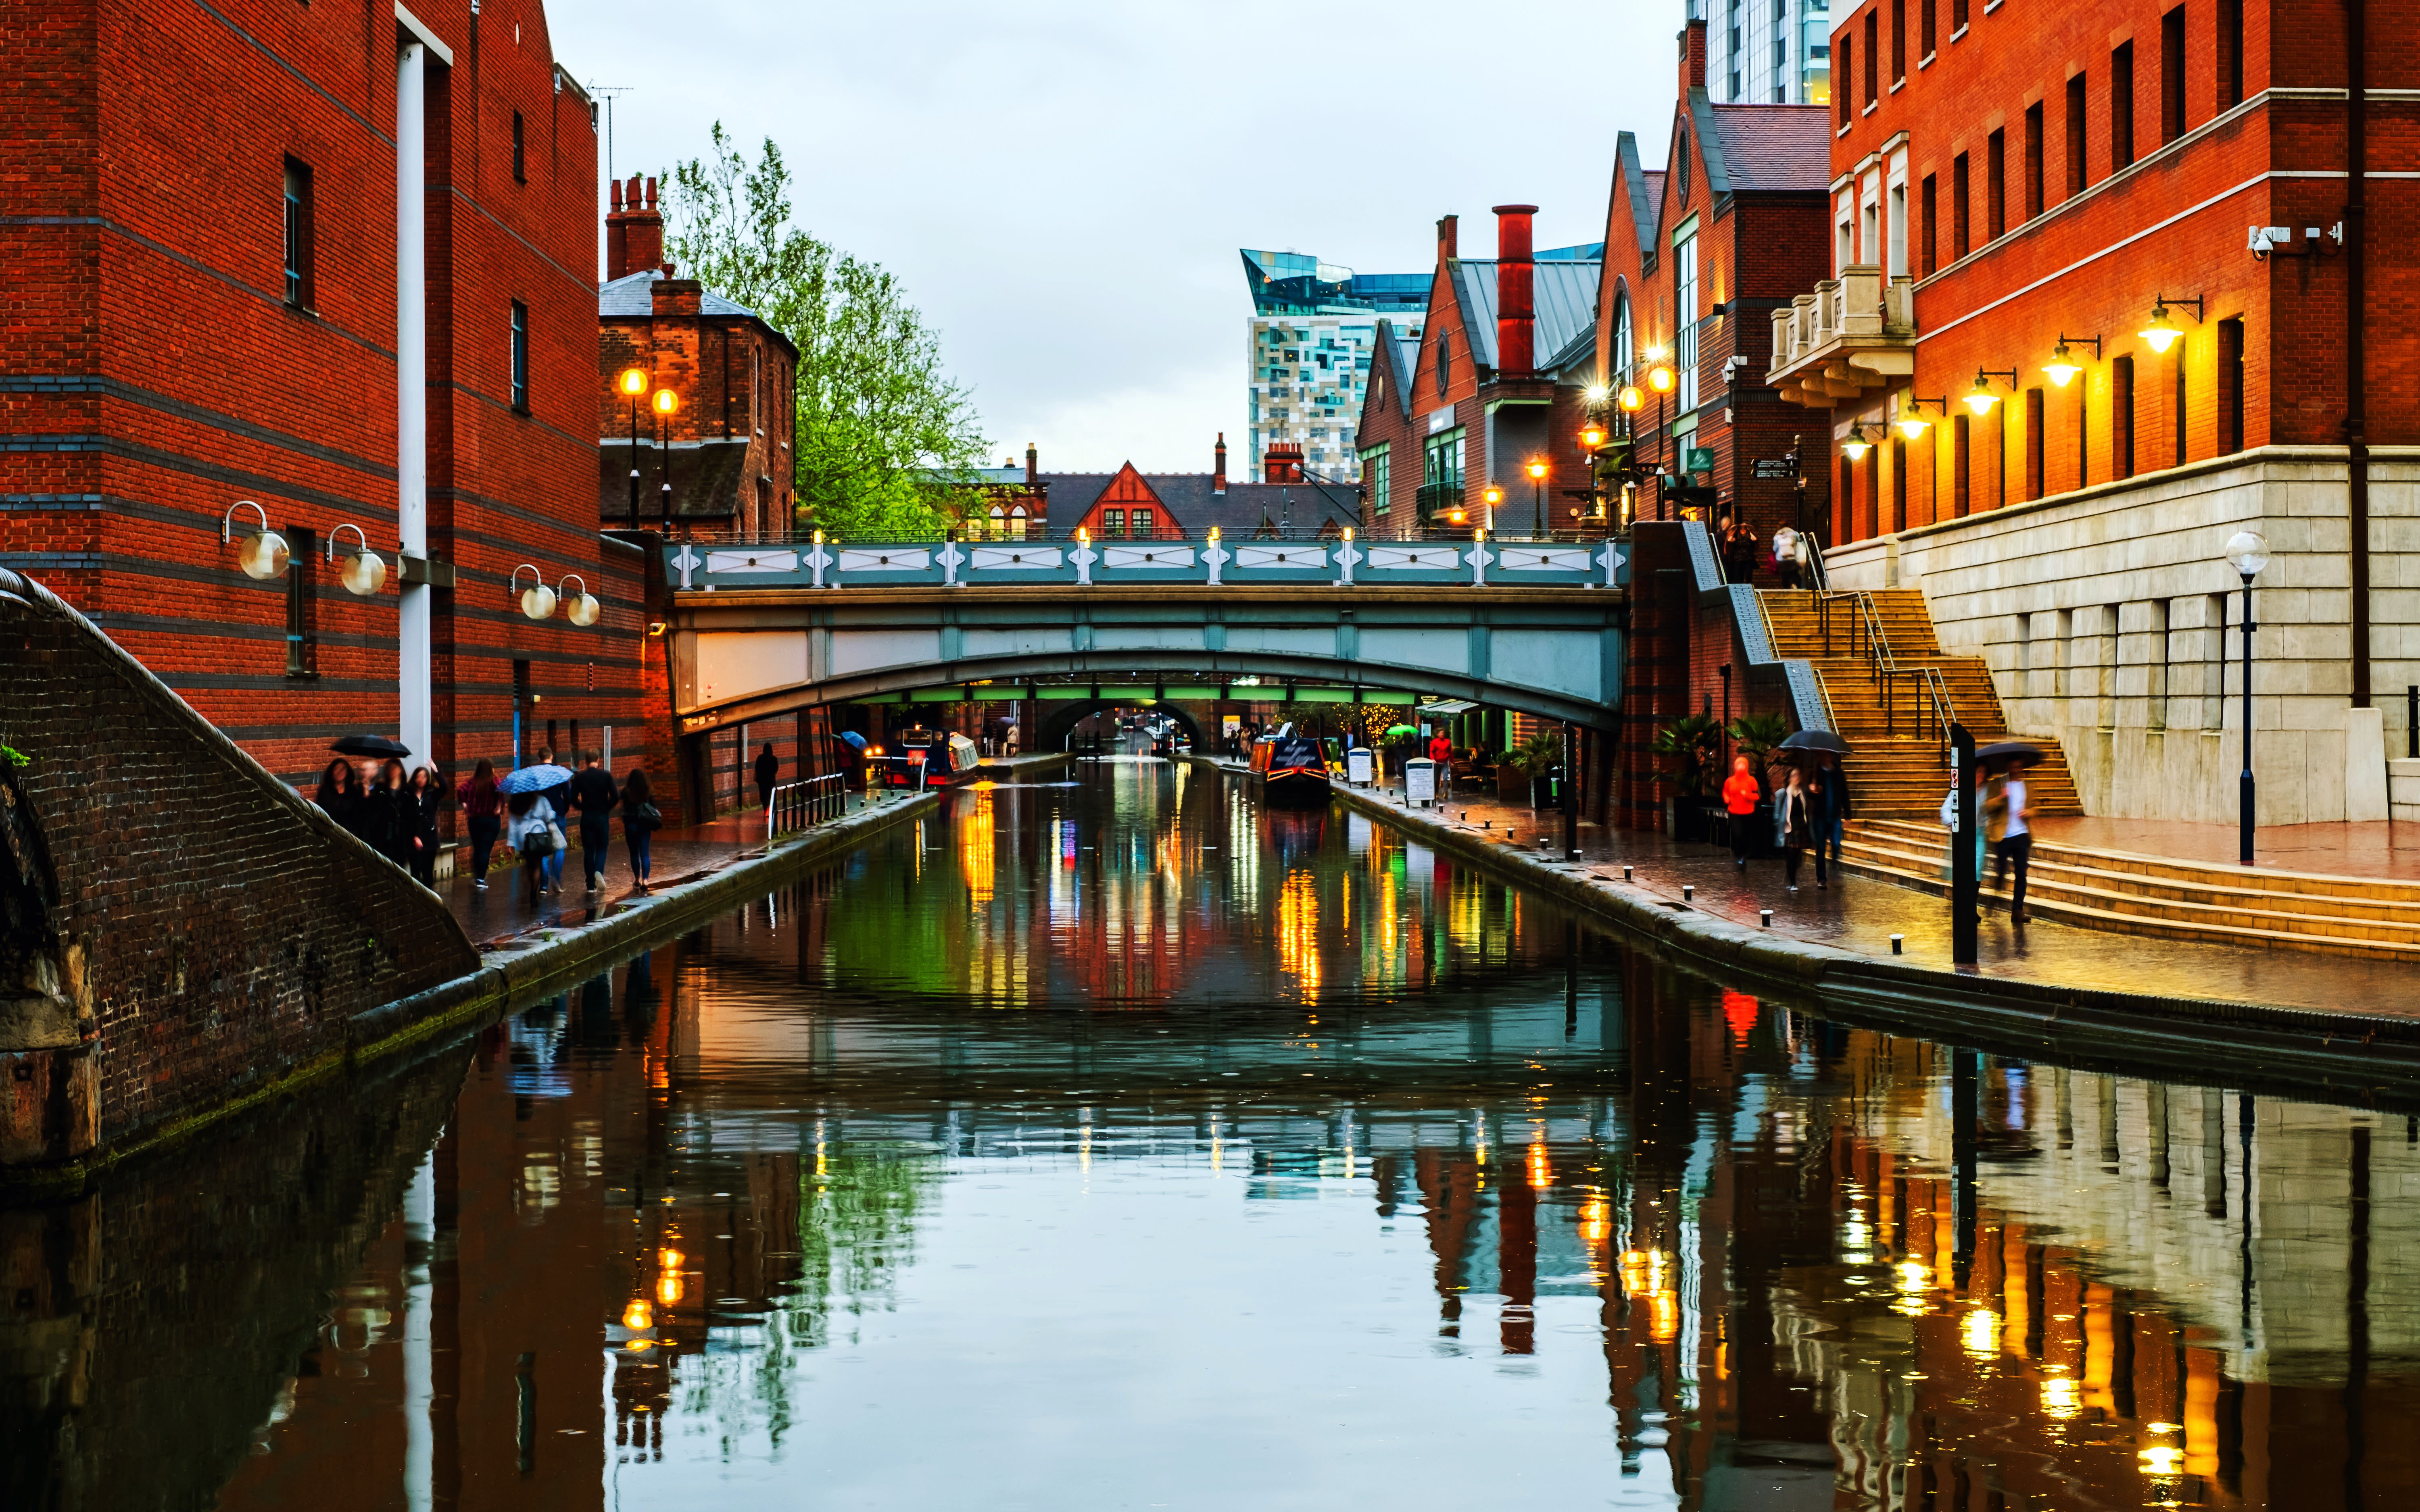 An image of a canal in Birmingham in the evening